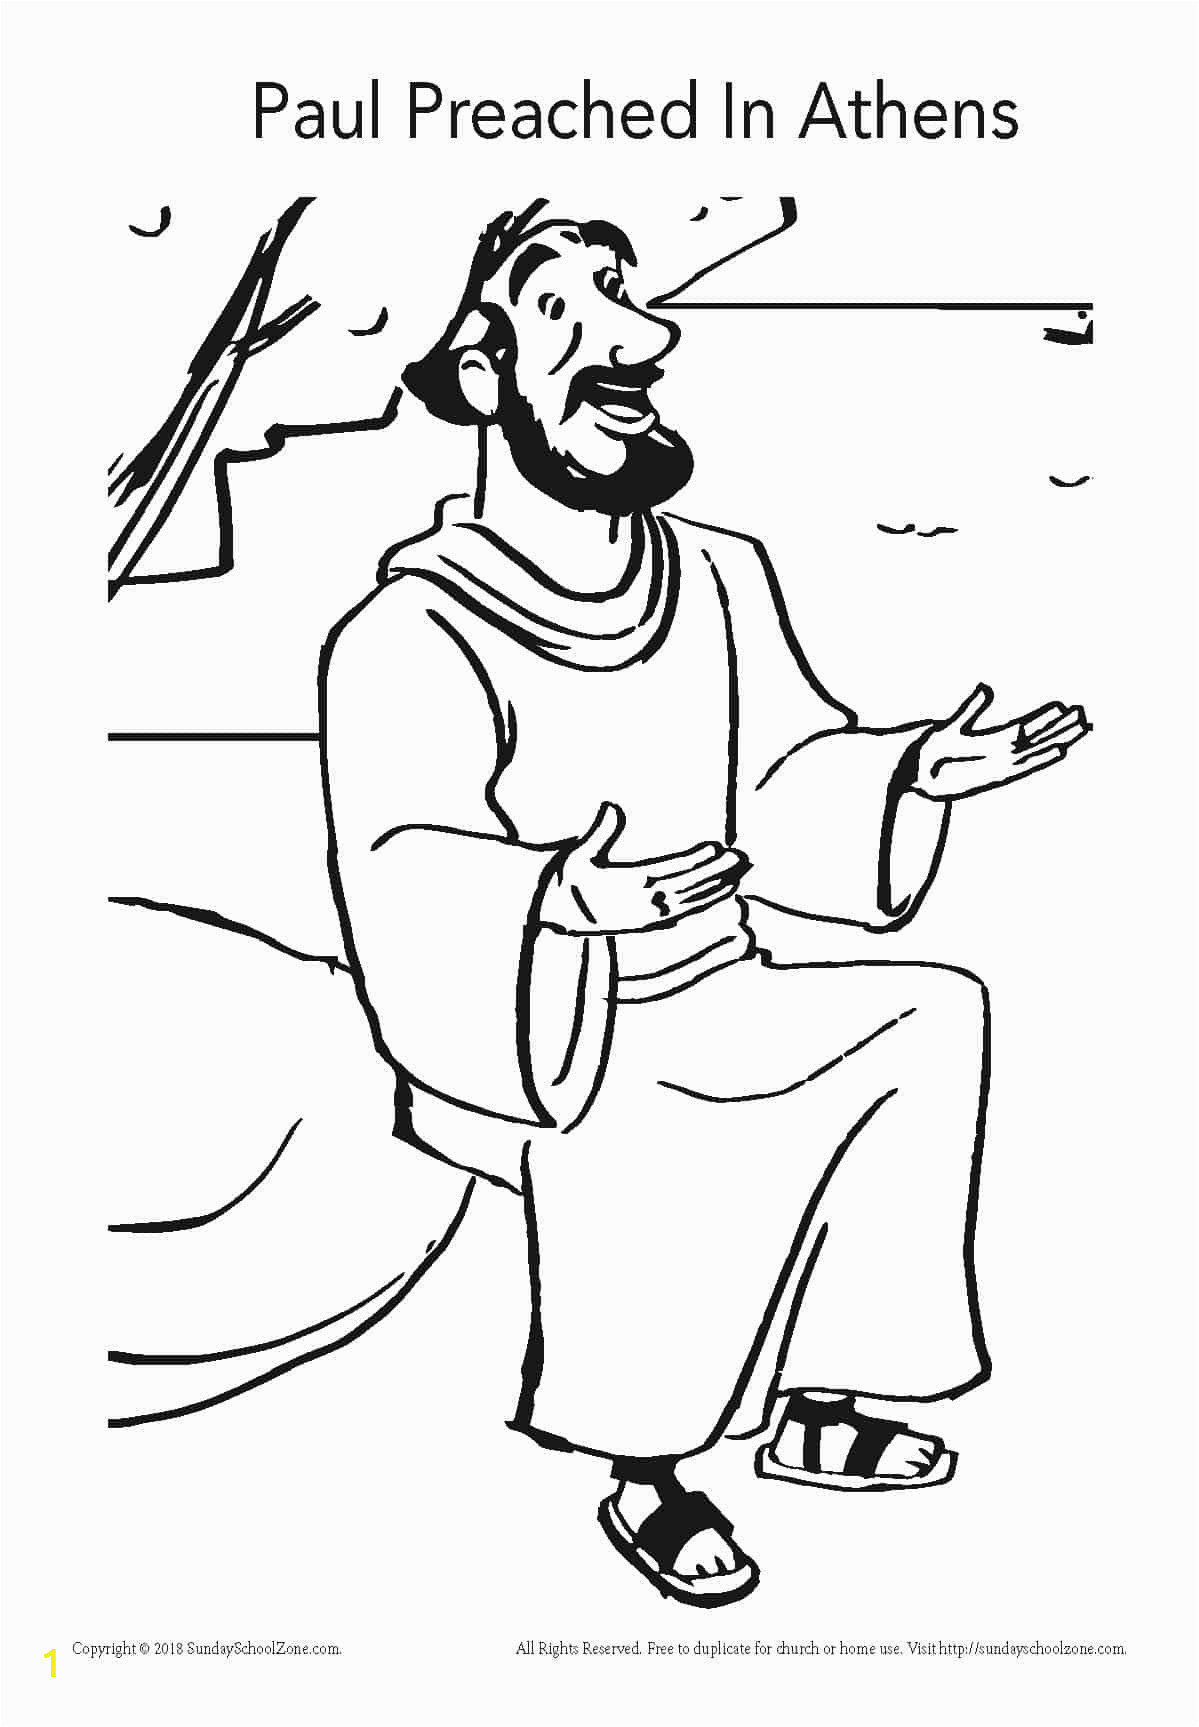 Coloring Pages About Paul From Bible Paul Preached In athens Coloring Page On Sunday School Zone